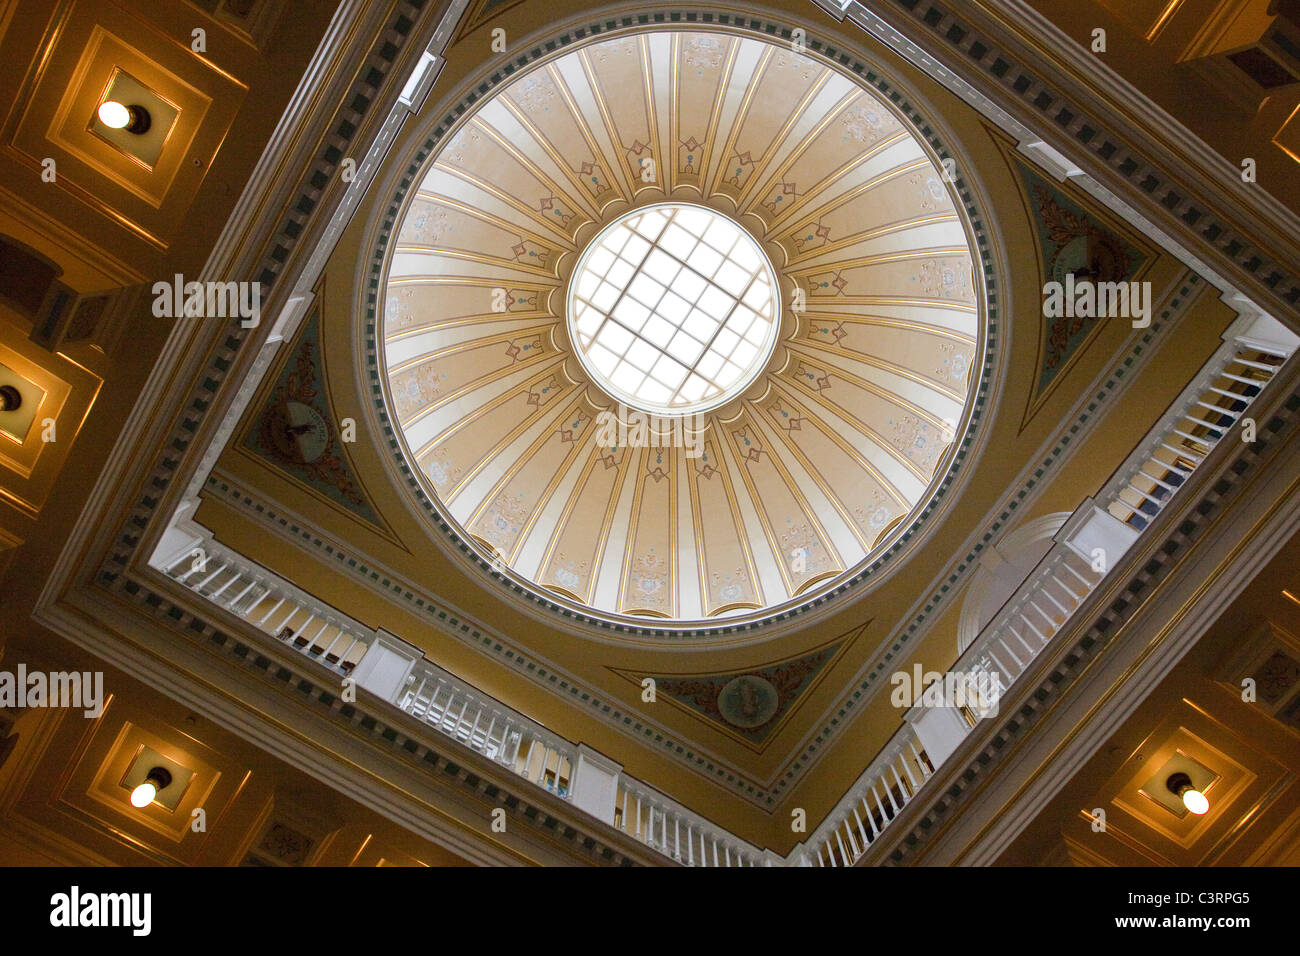 Dome above the rotunda of the state capitol building in Richmond, VA Stock Photo